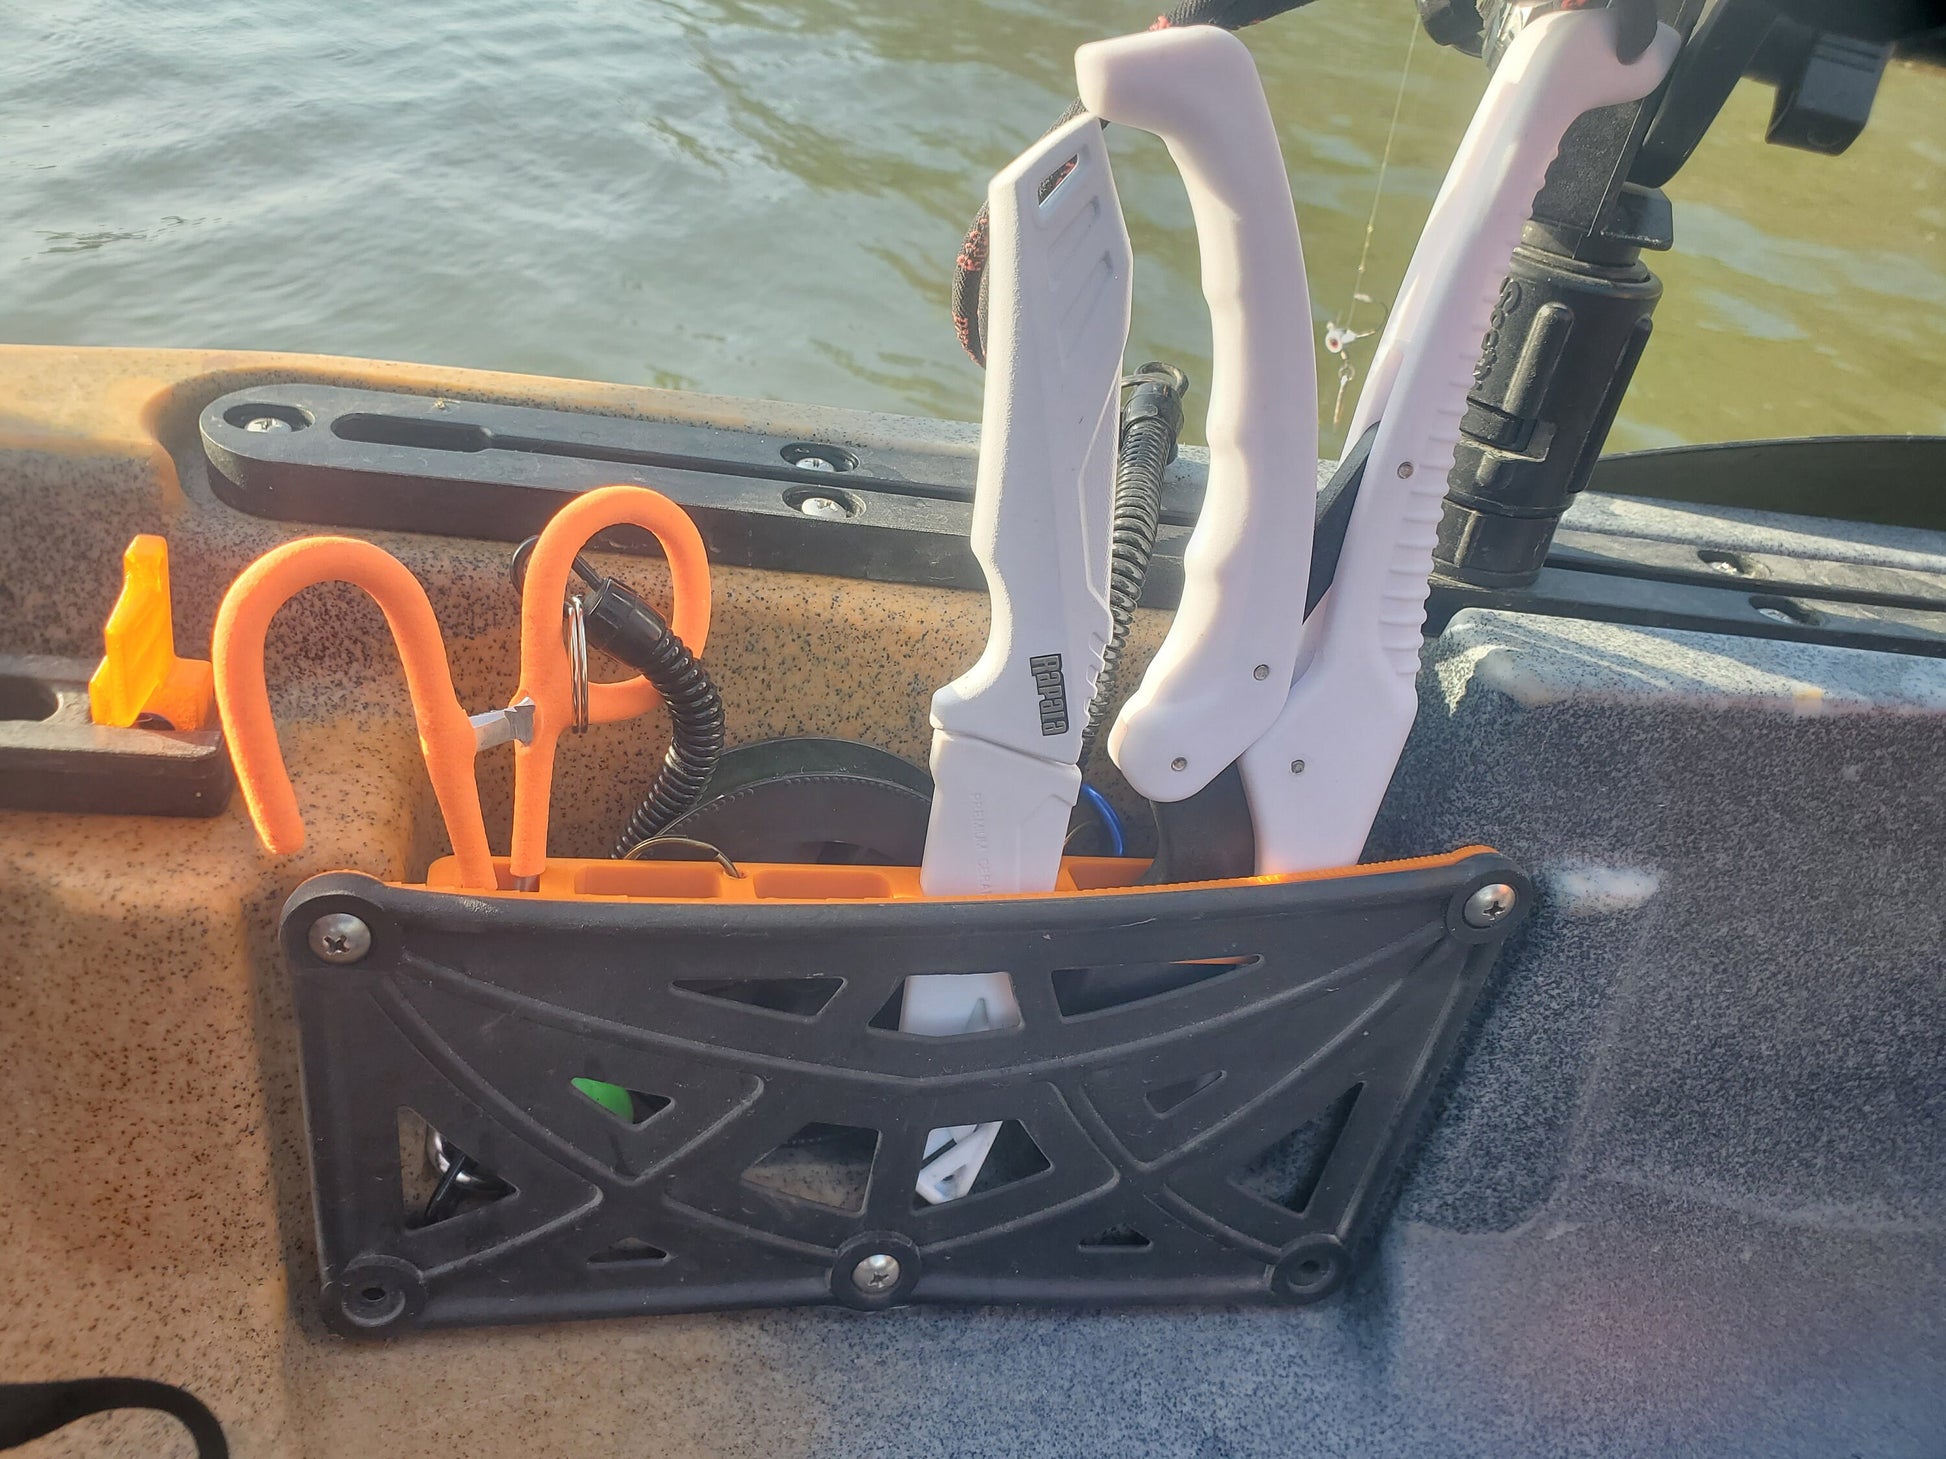 Photo showing tool holder holding tools in a kayak